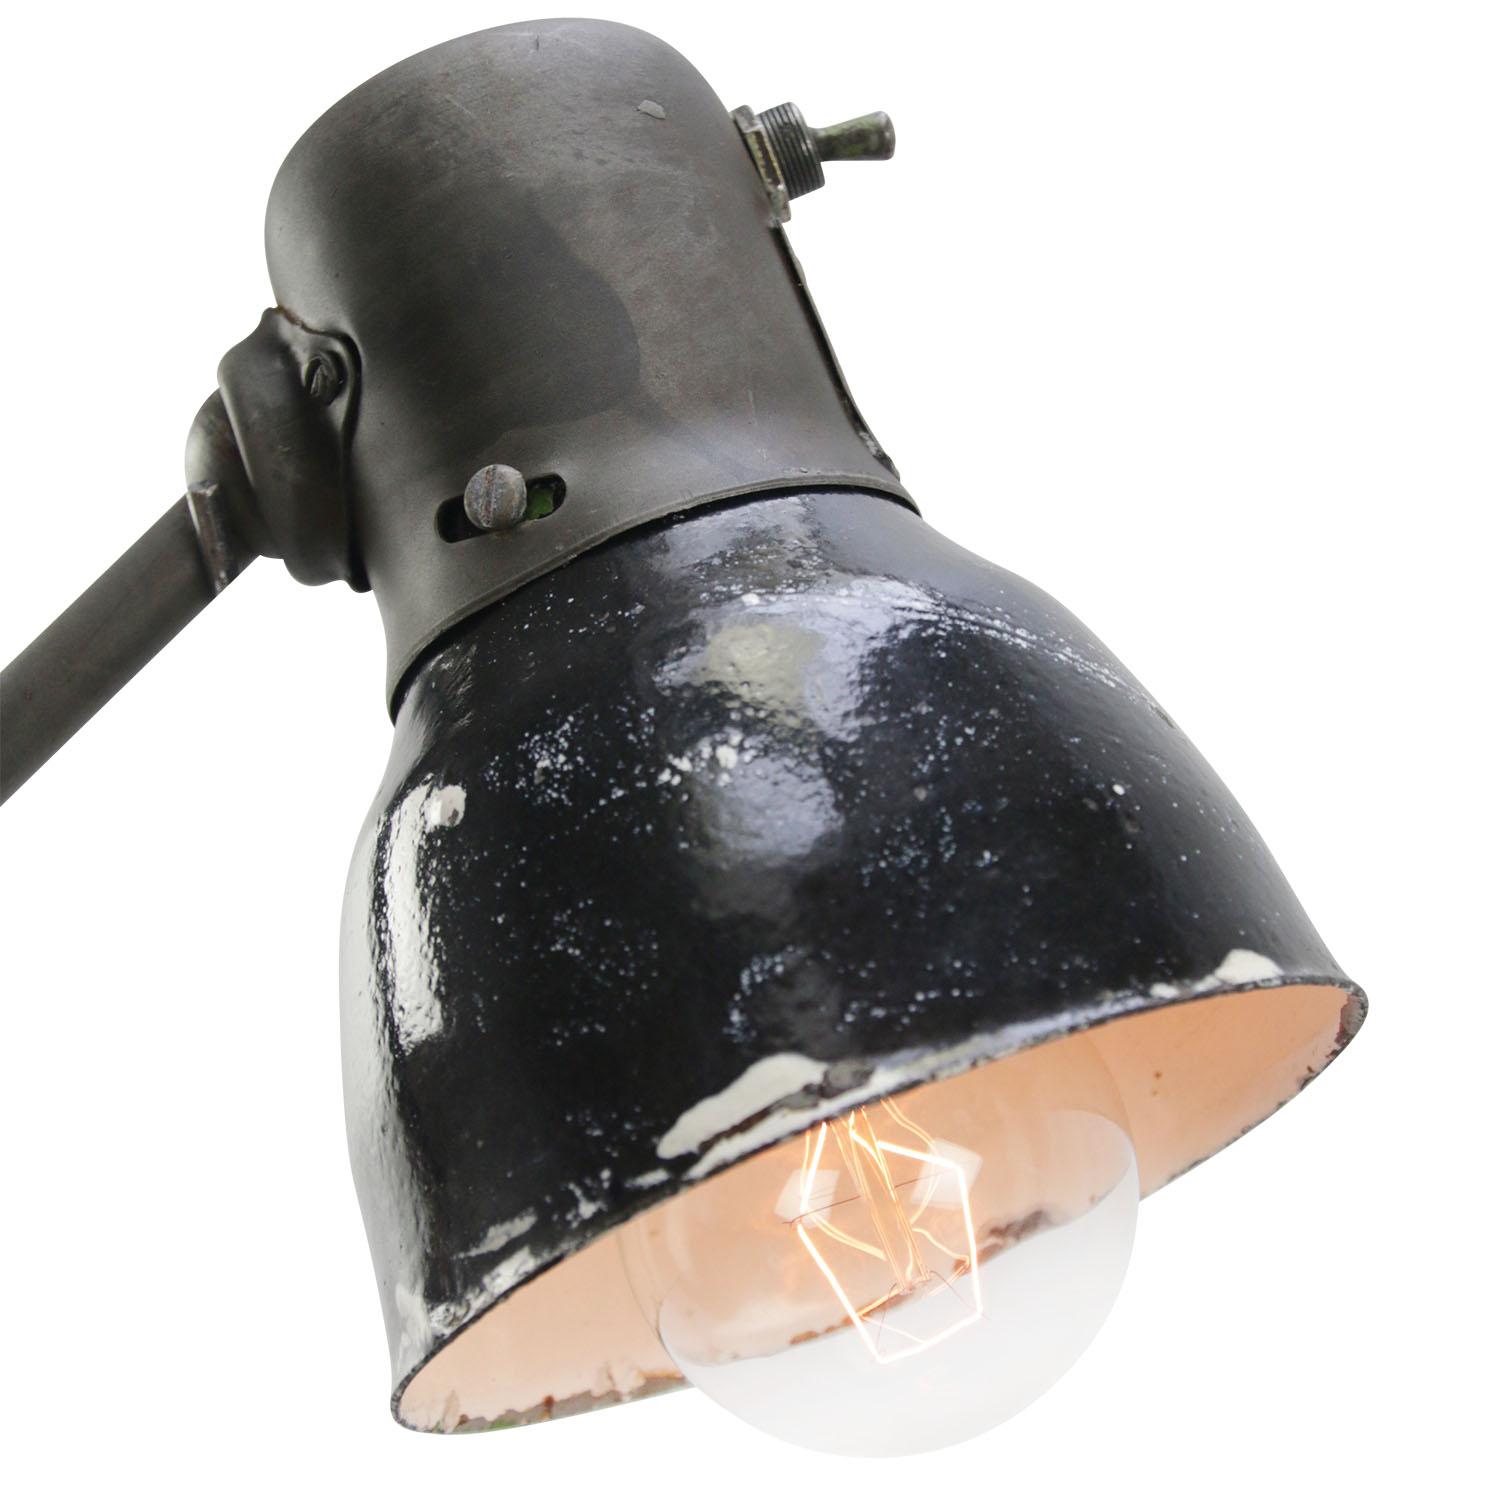 Metal work light / wall lamp with 2 arms.
Black enamel shade
Switch in shade

size foot 8.5×8.5cm

E27/E26

Priced per individual item. All lamps have been made suitable by international standards for incandescent light bulbs,